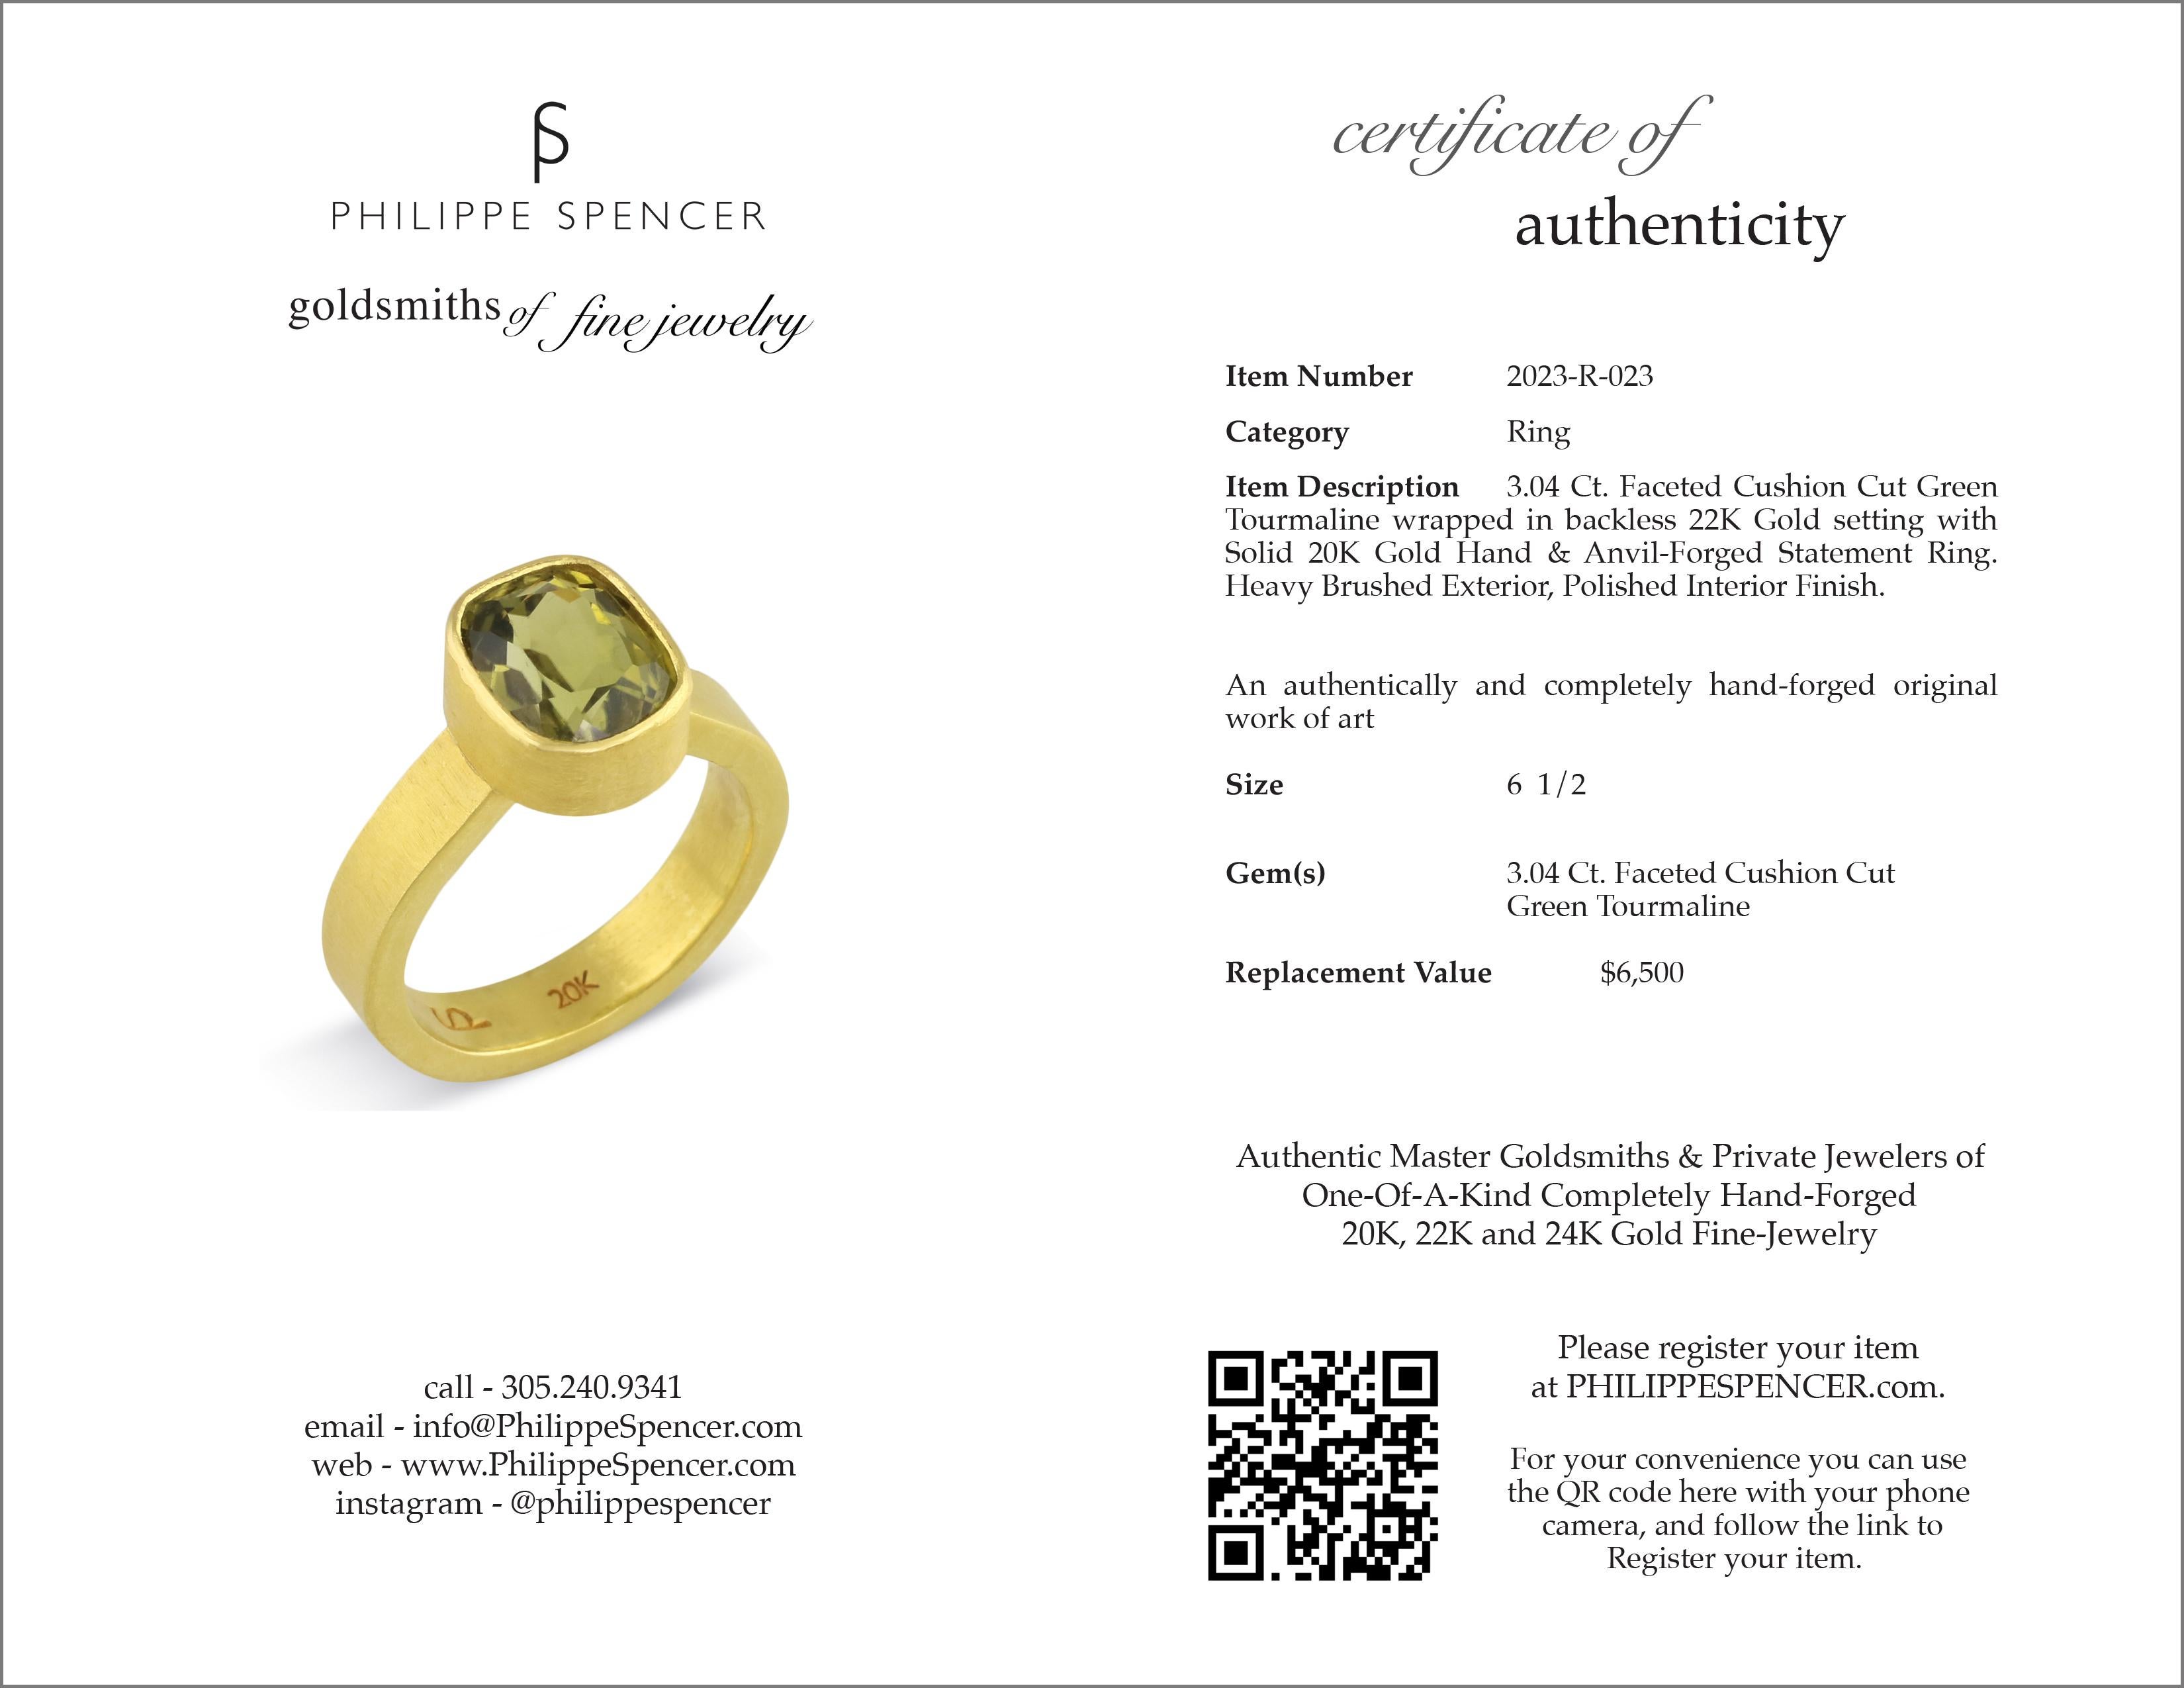 Cushion Cut PHILIPPE SPENCER 3.04 Ct. Tourmaline in 22K and 20K Gold Statement Ring